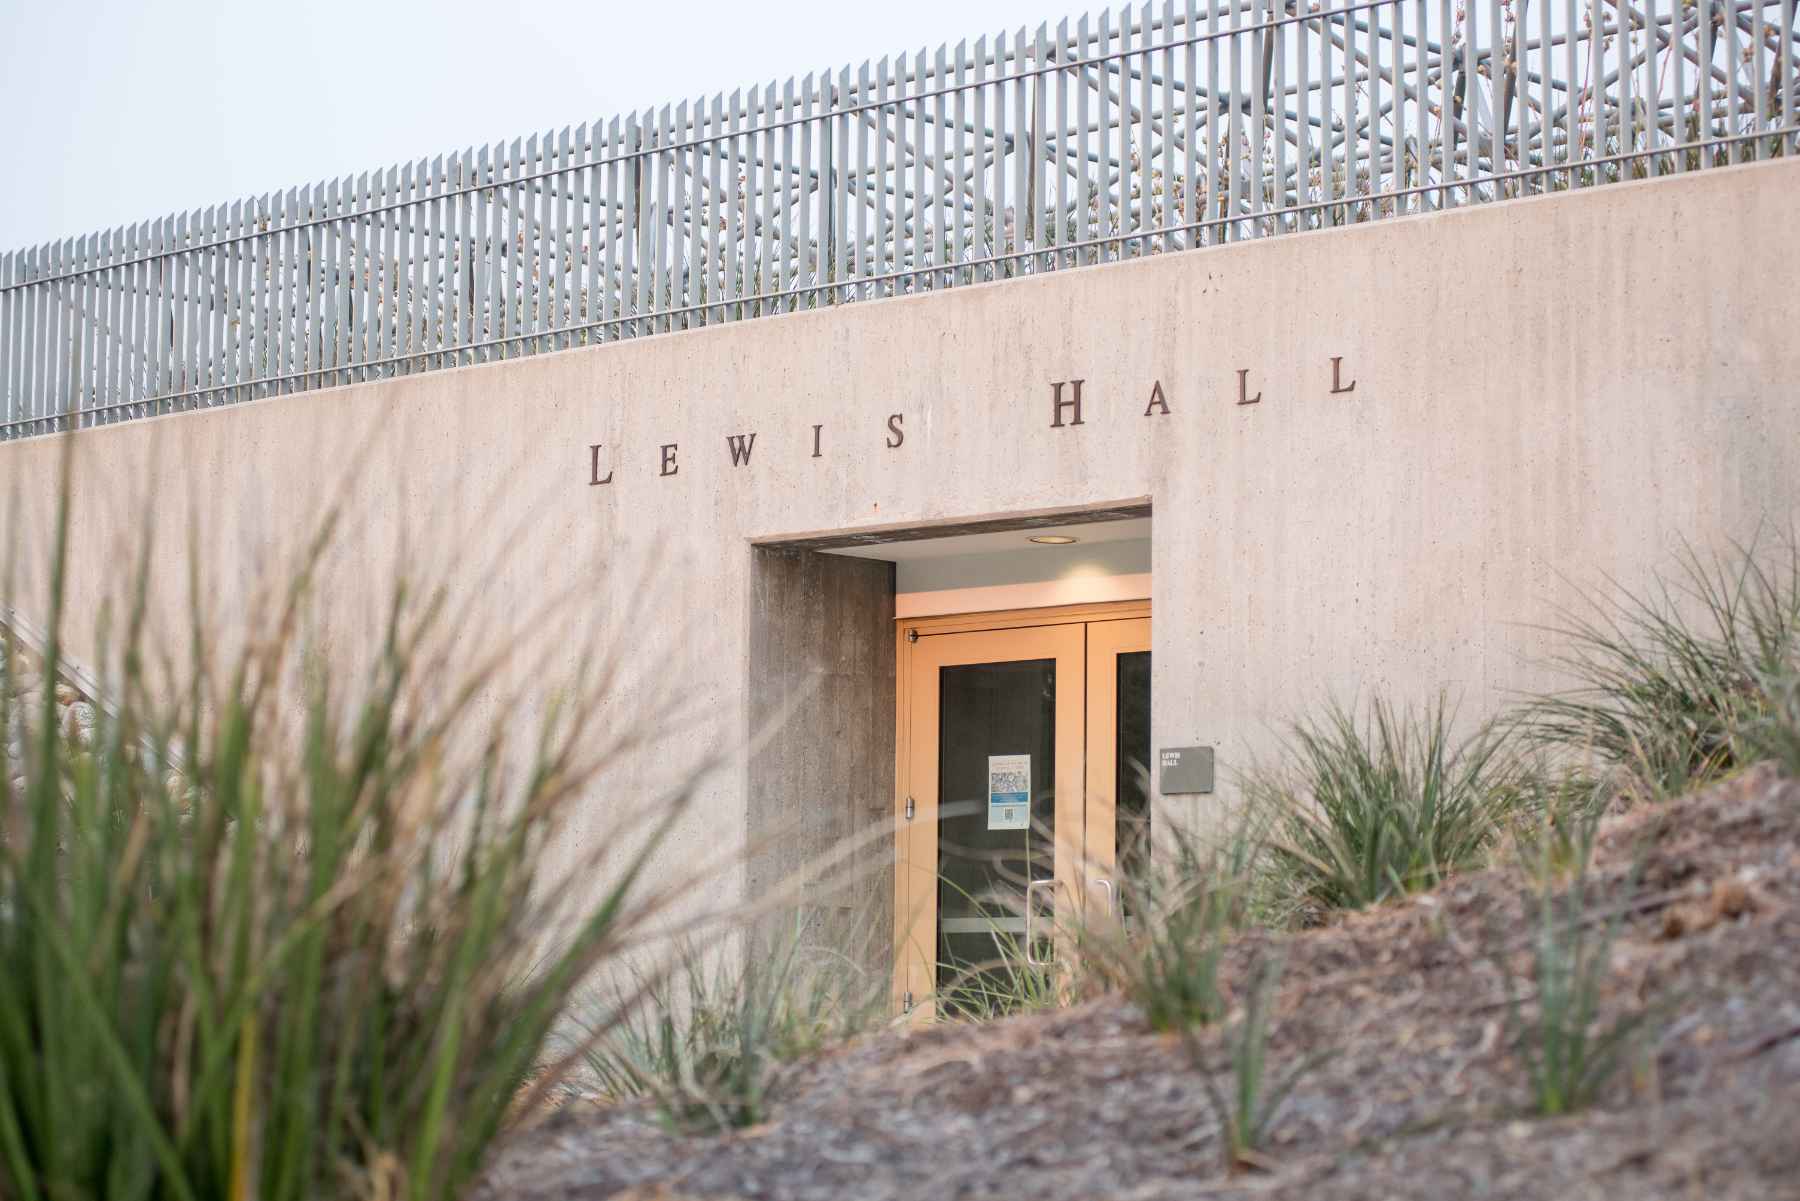 Lewis Hall - Green Building